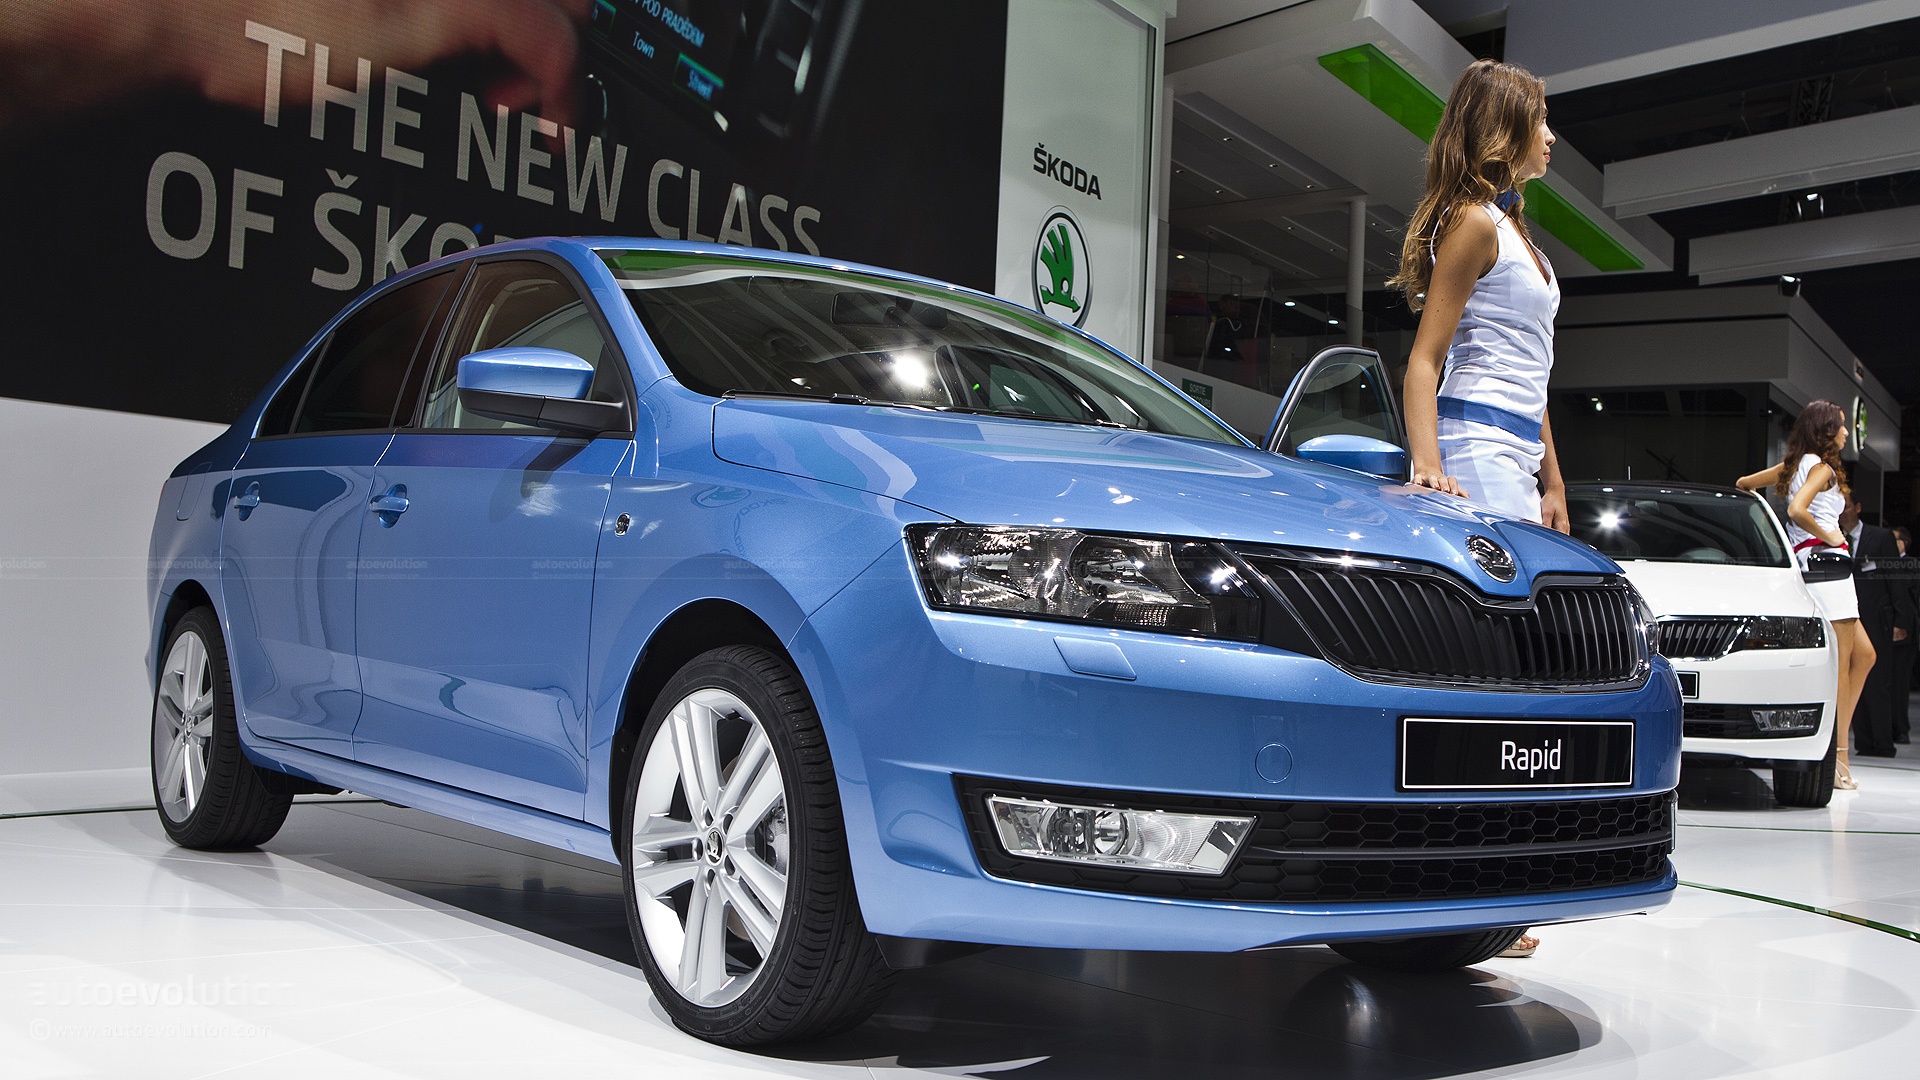 Suppliers to the new Skoda Rapid